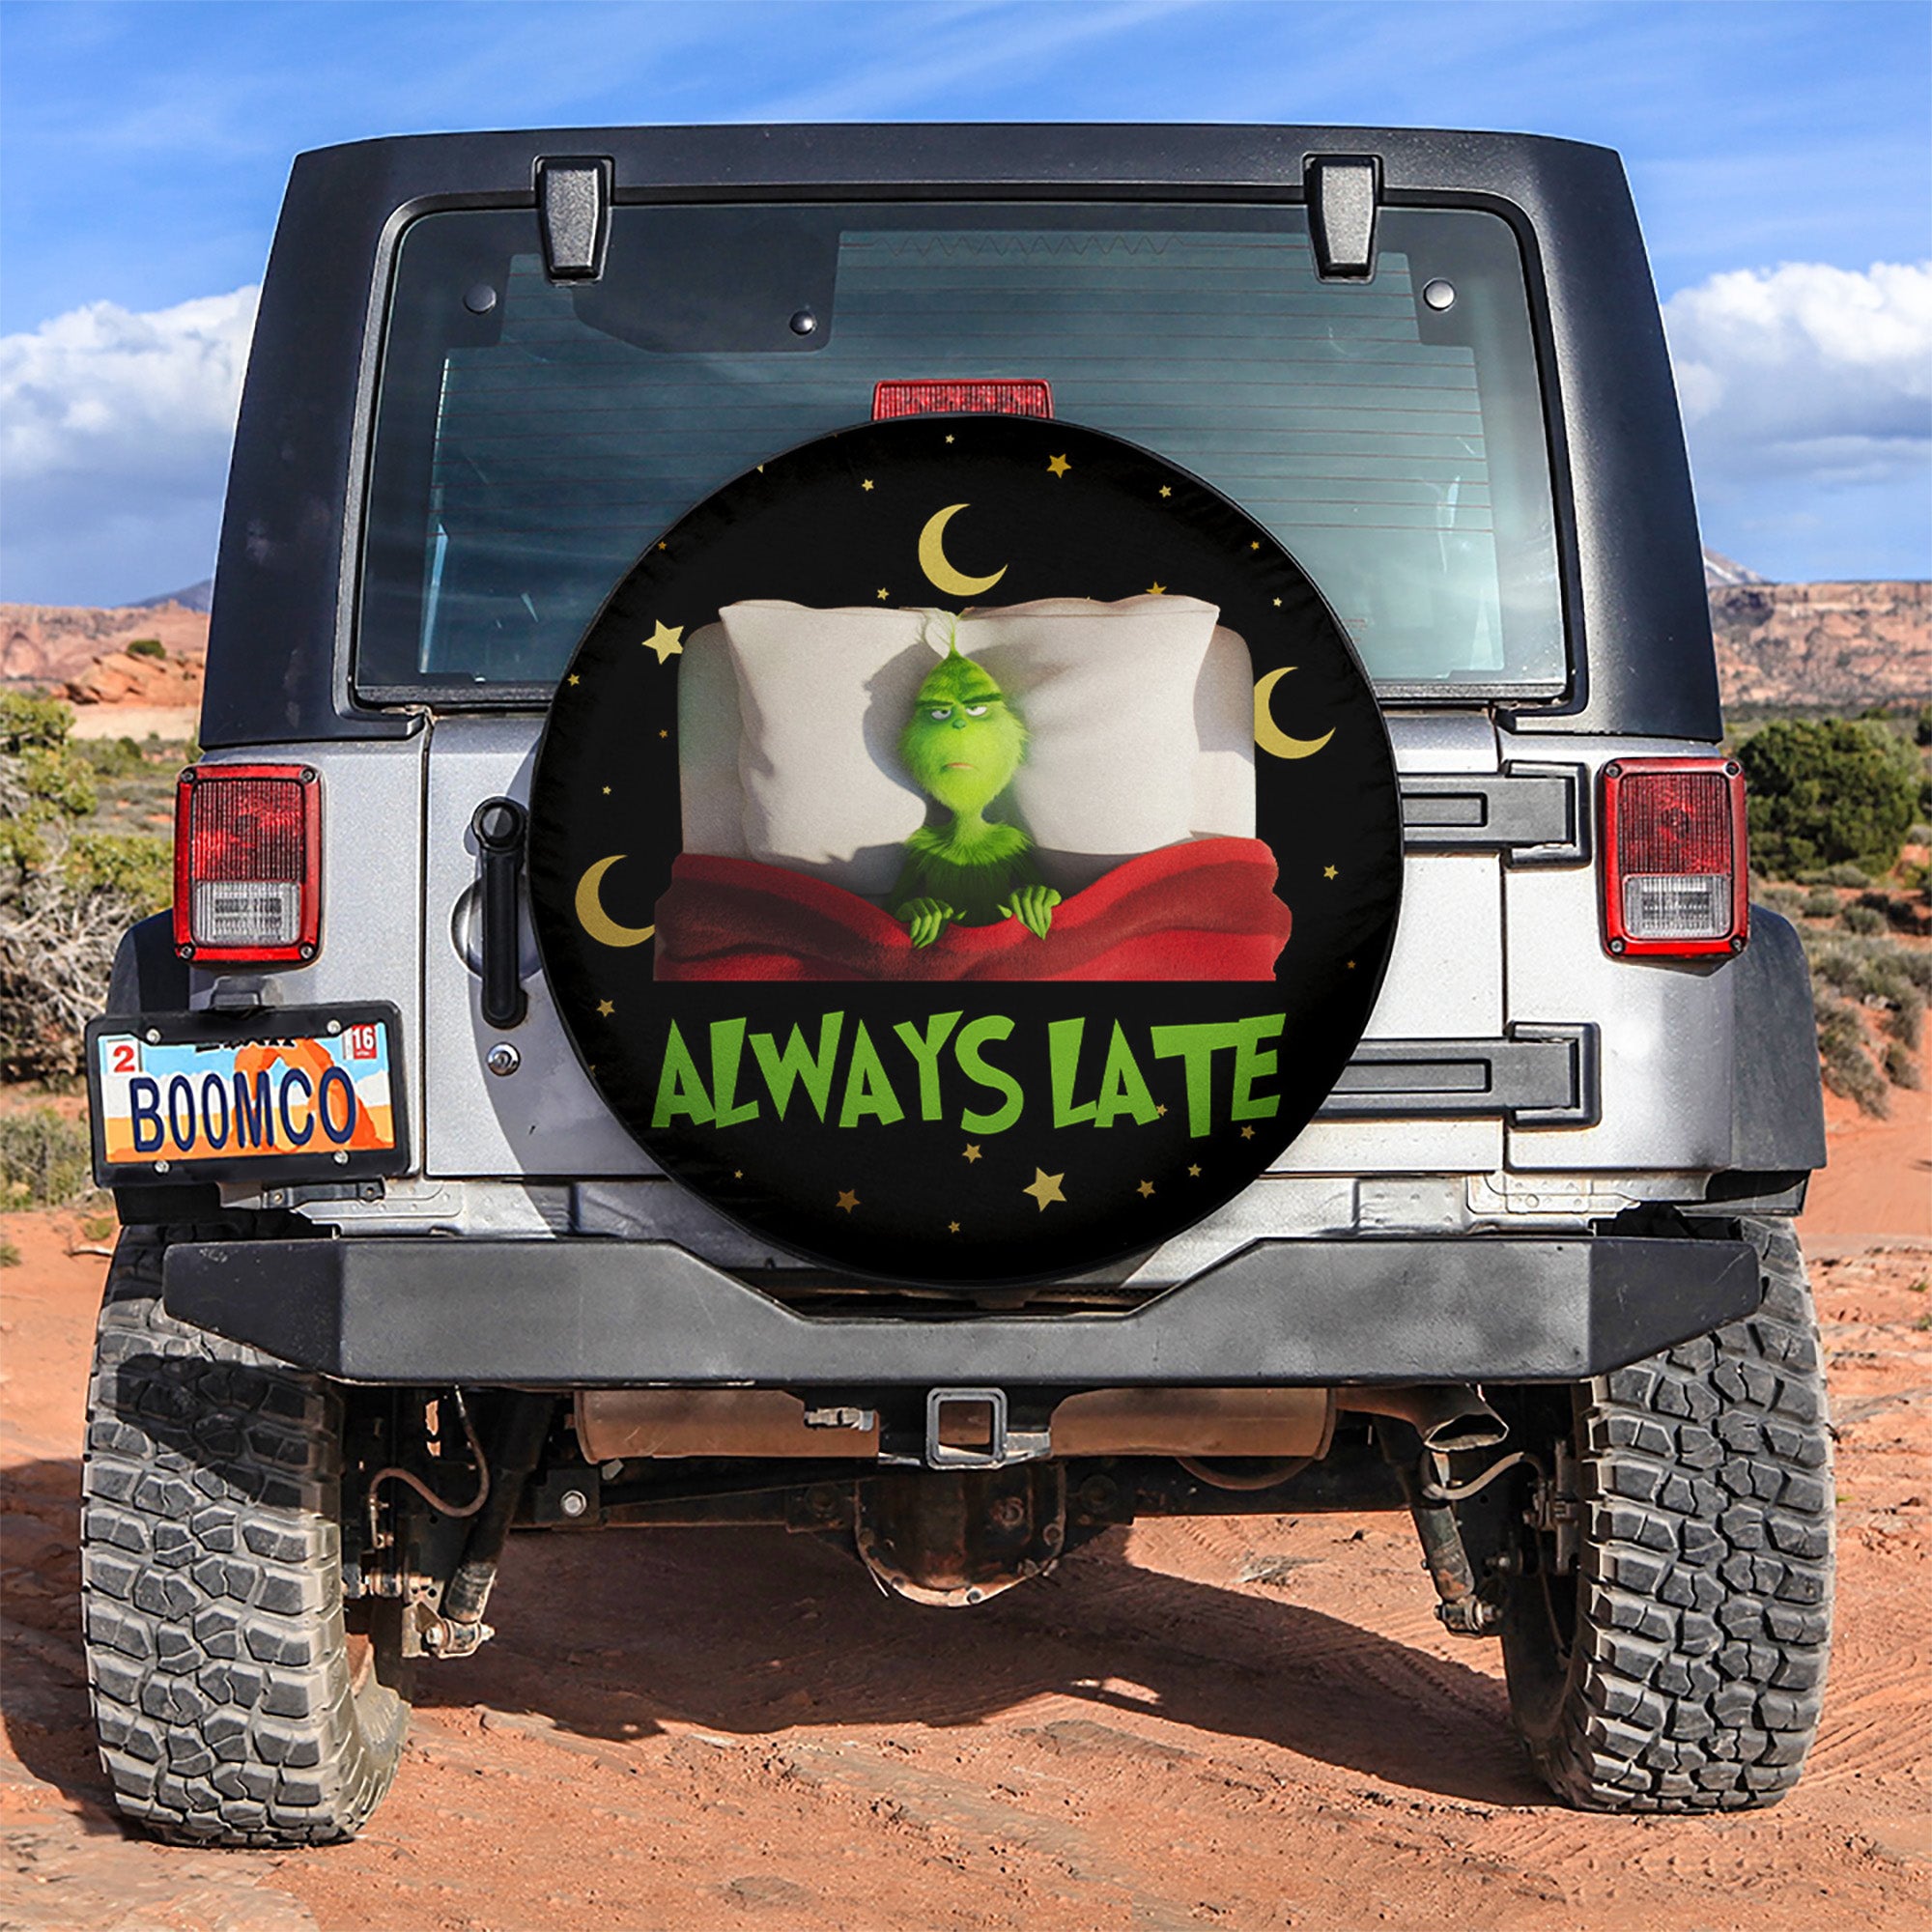 Grinch Always Late Car Spare Tire Covers Gift For Campers Nearkii